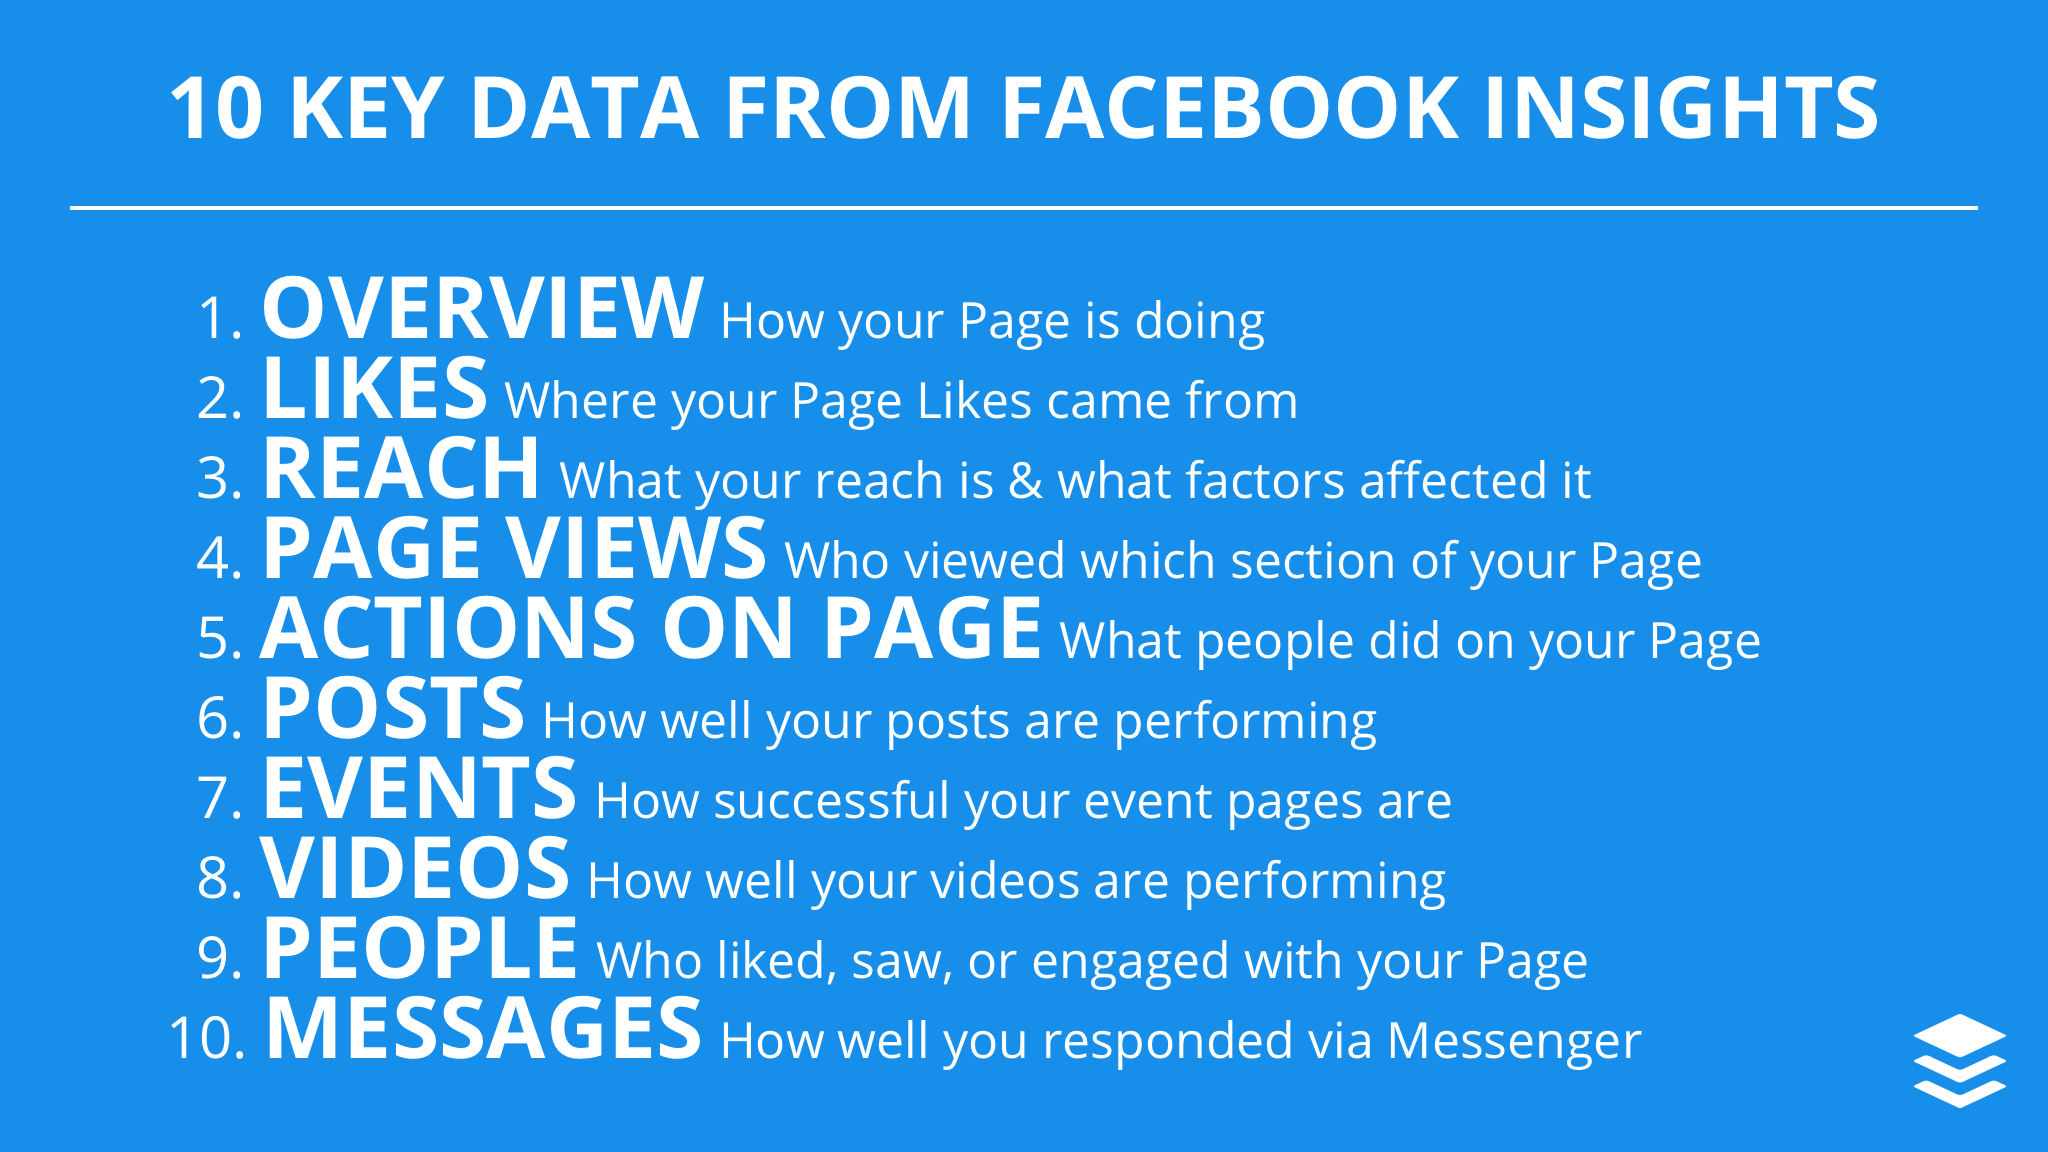 Facebook Insights Guide - 10 Data from Facebook Insights